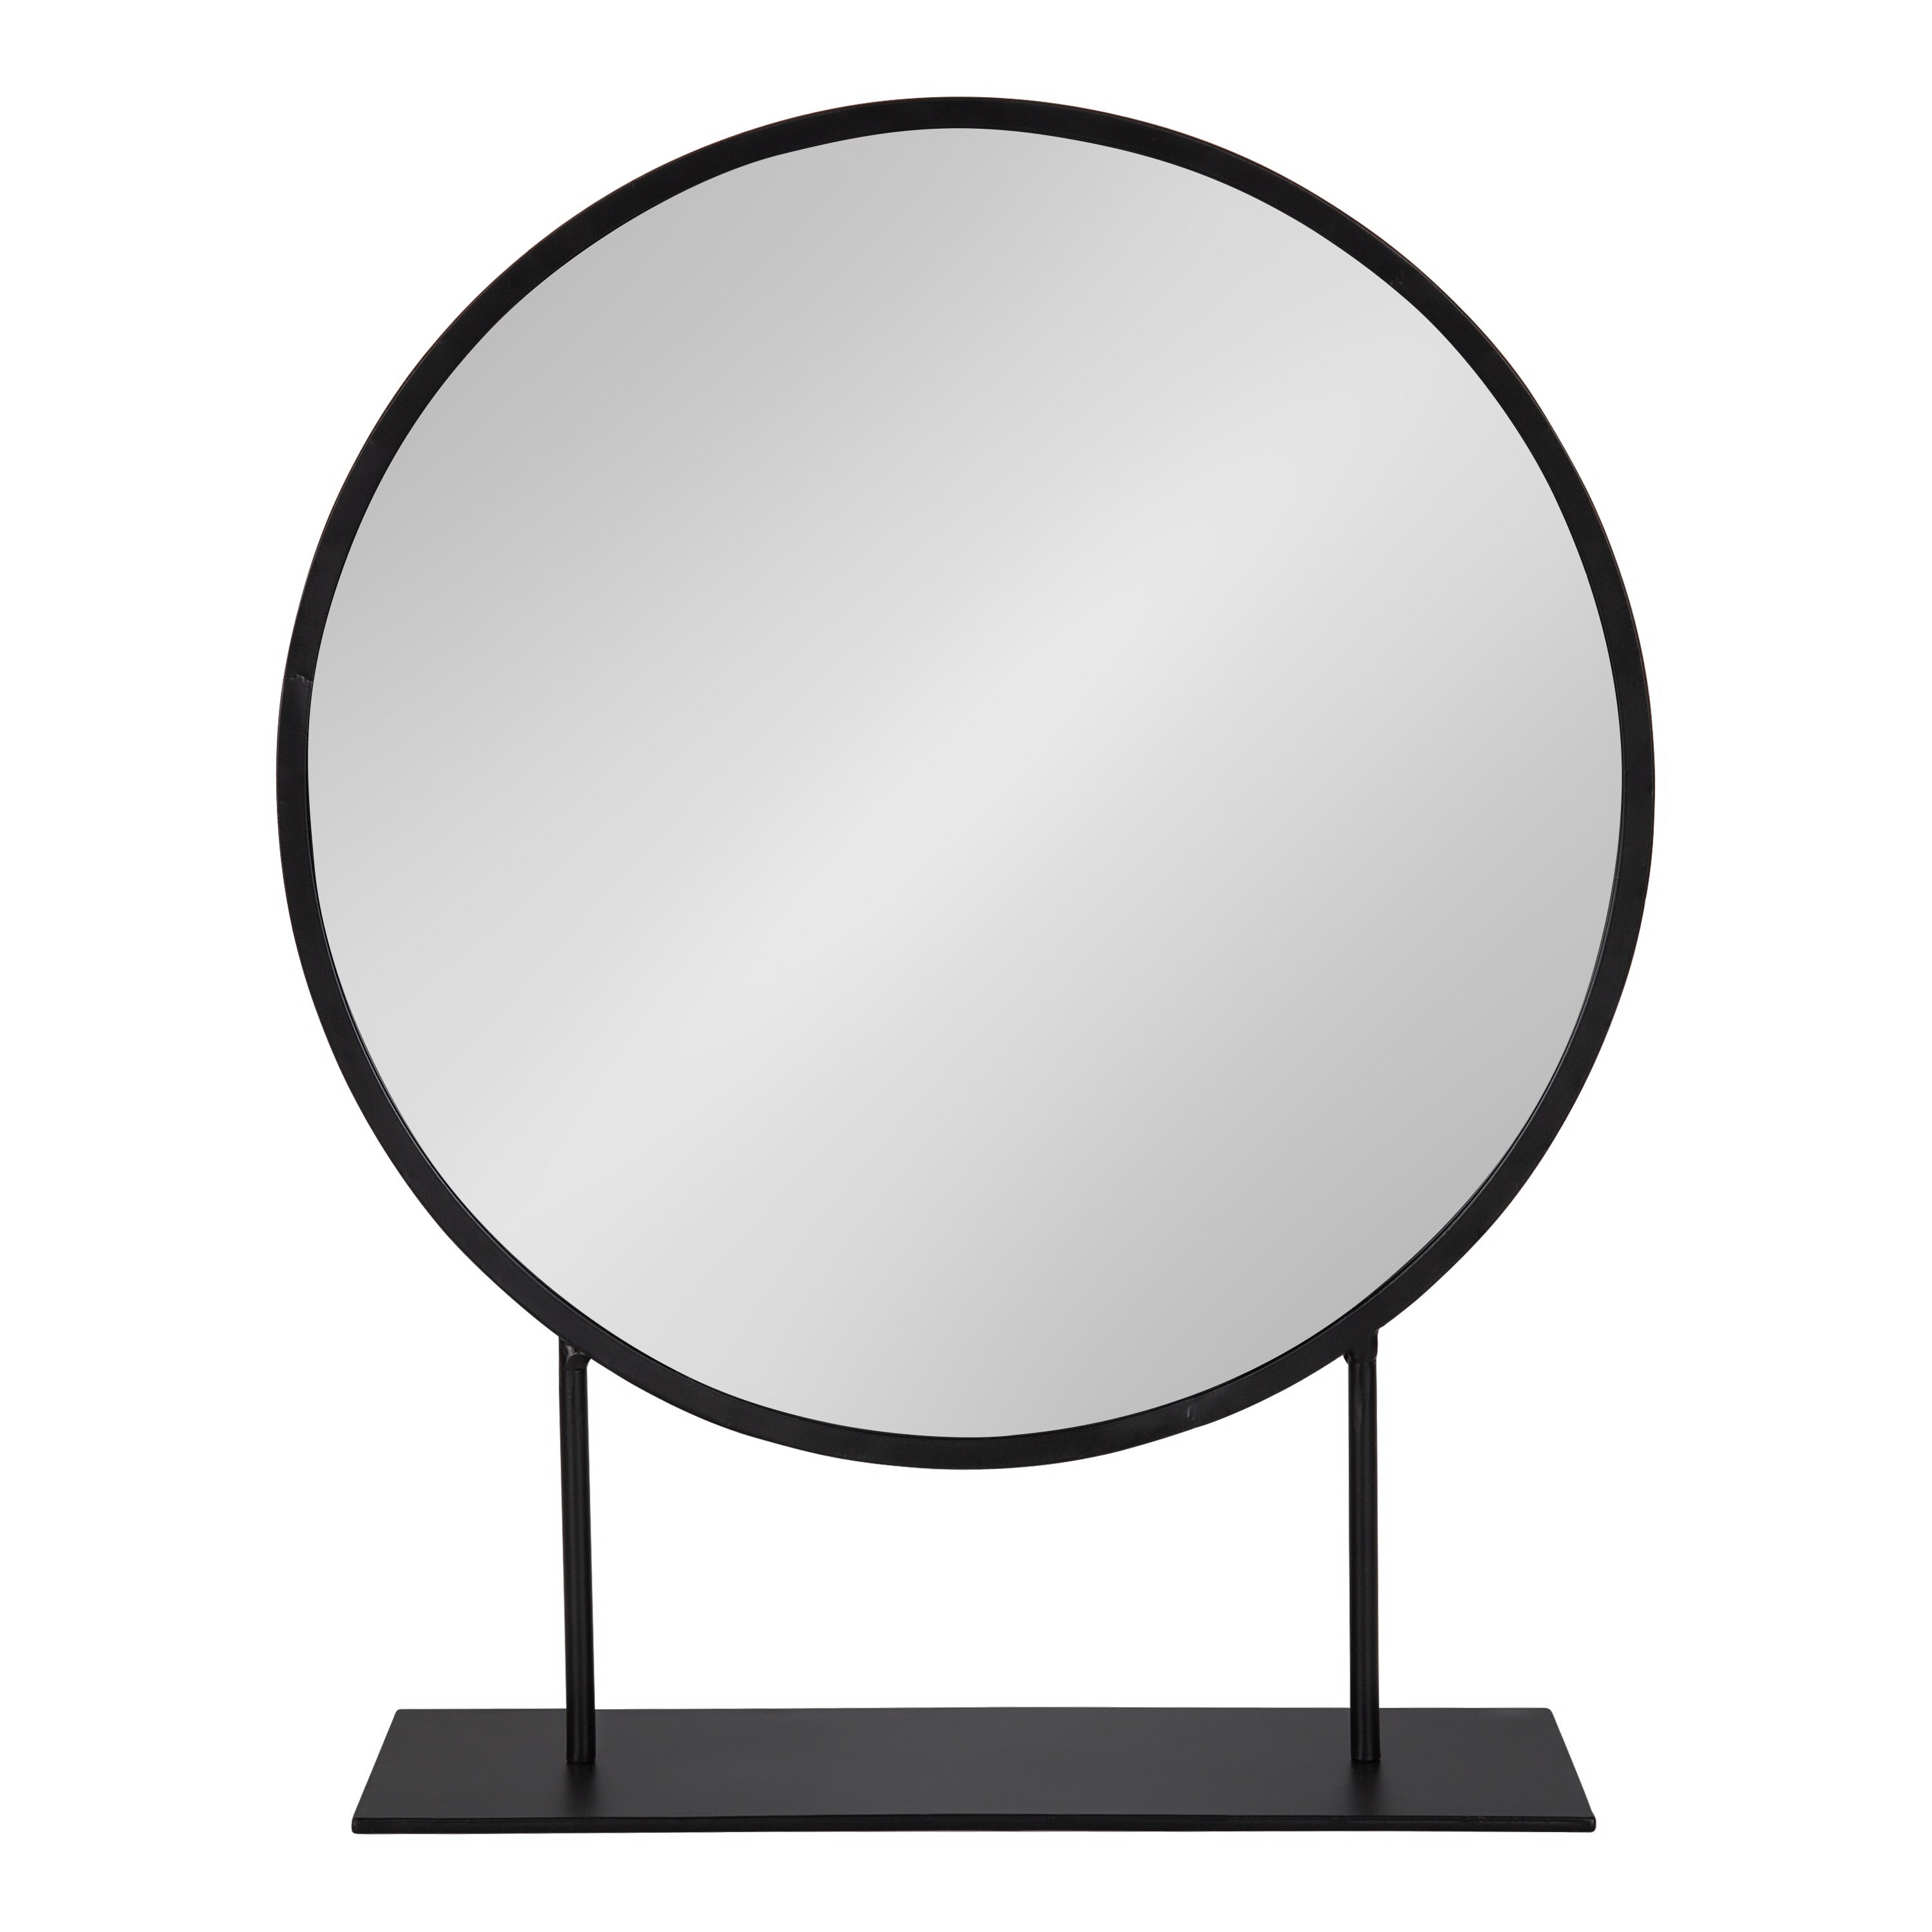 Kate and Laurel Rouen 18-in W x 22-in H Round Black Framed Wall Mirror